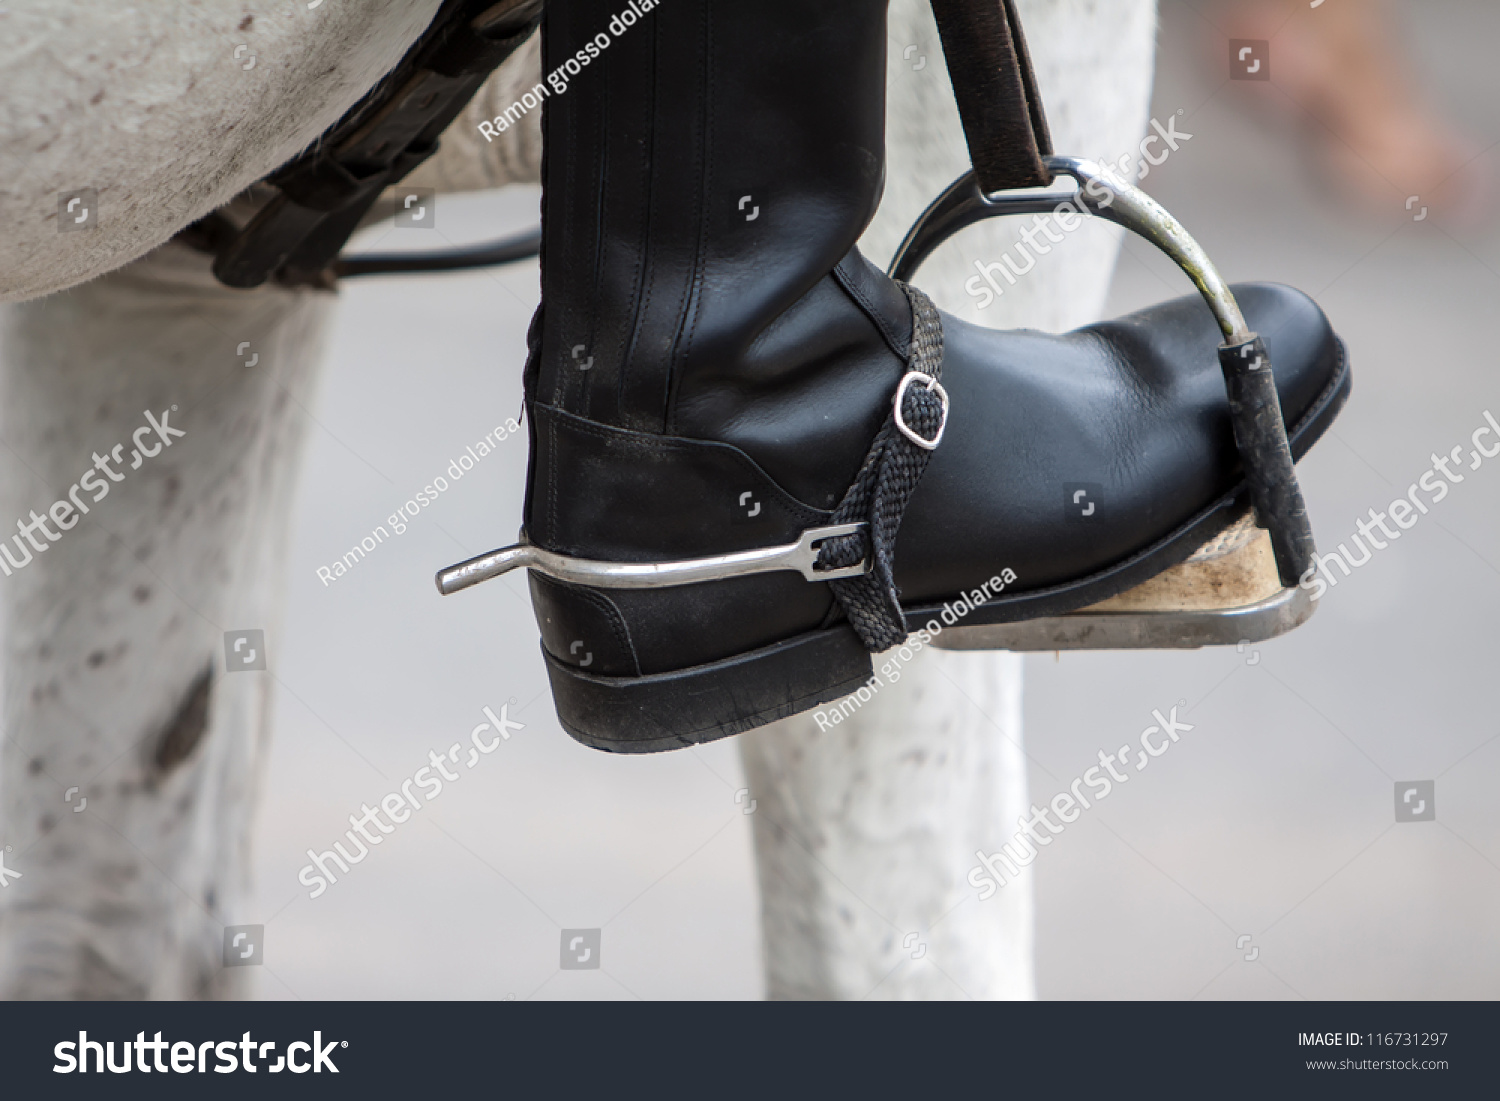 Close Up Of A Black Leather Boot On Stirrup Stock Photo 116731297 ...